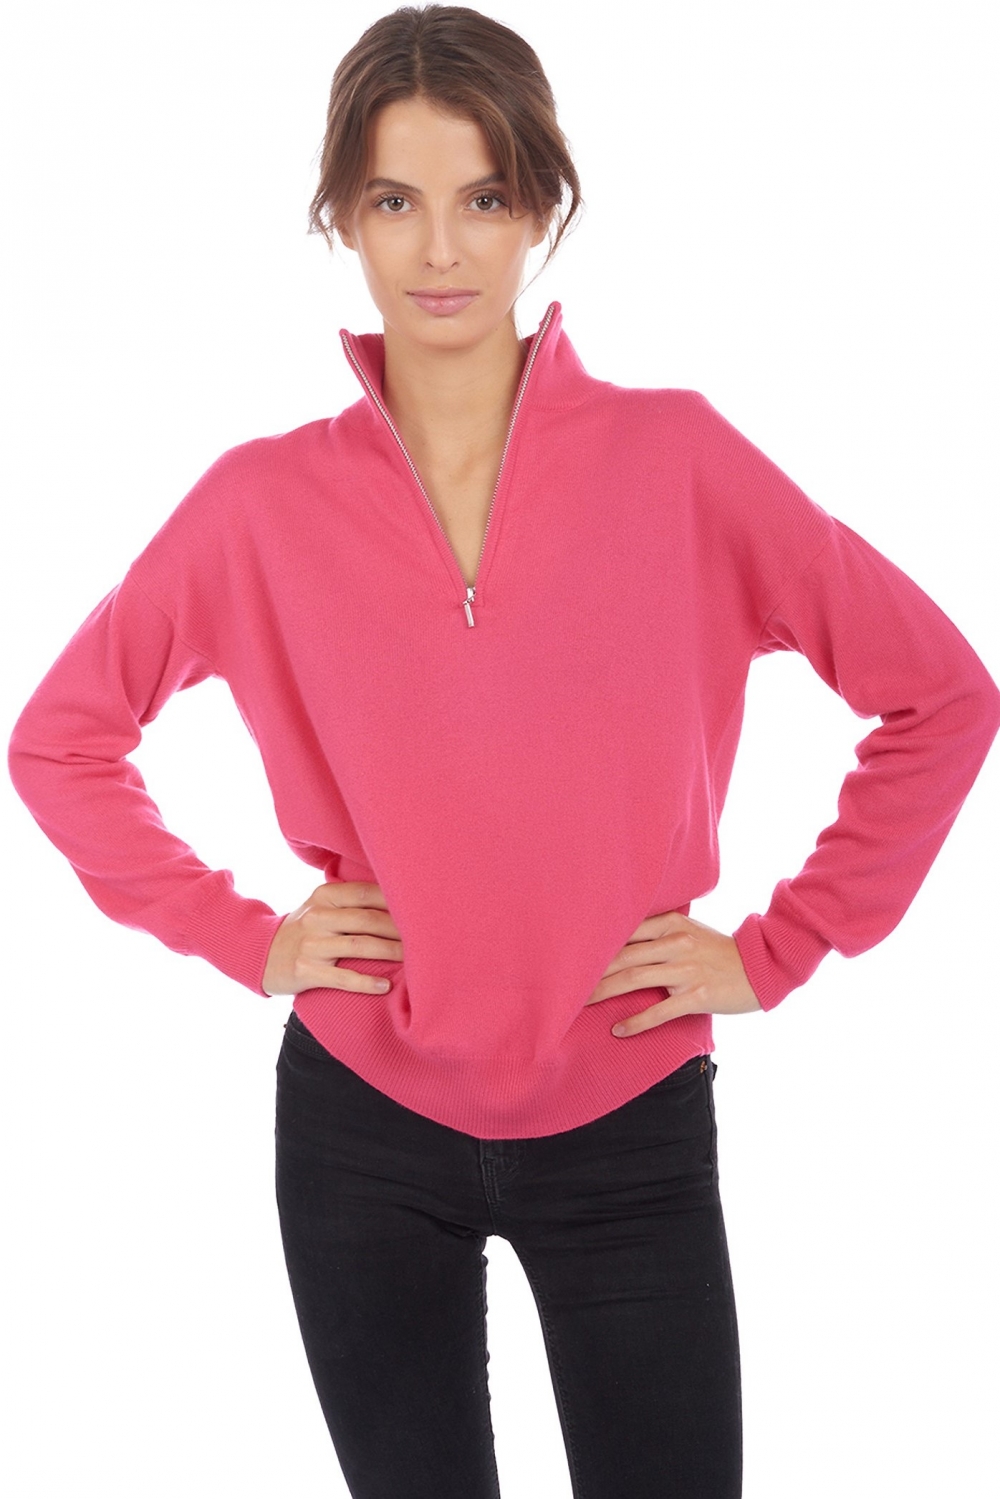 Cachemire pull femme col roule groseille rose shocking 2xl